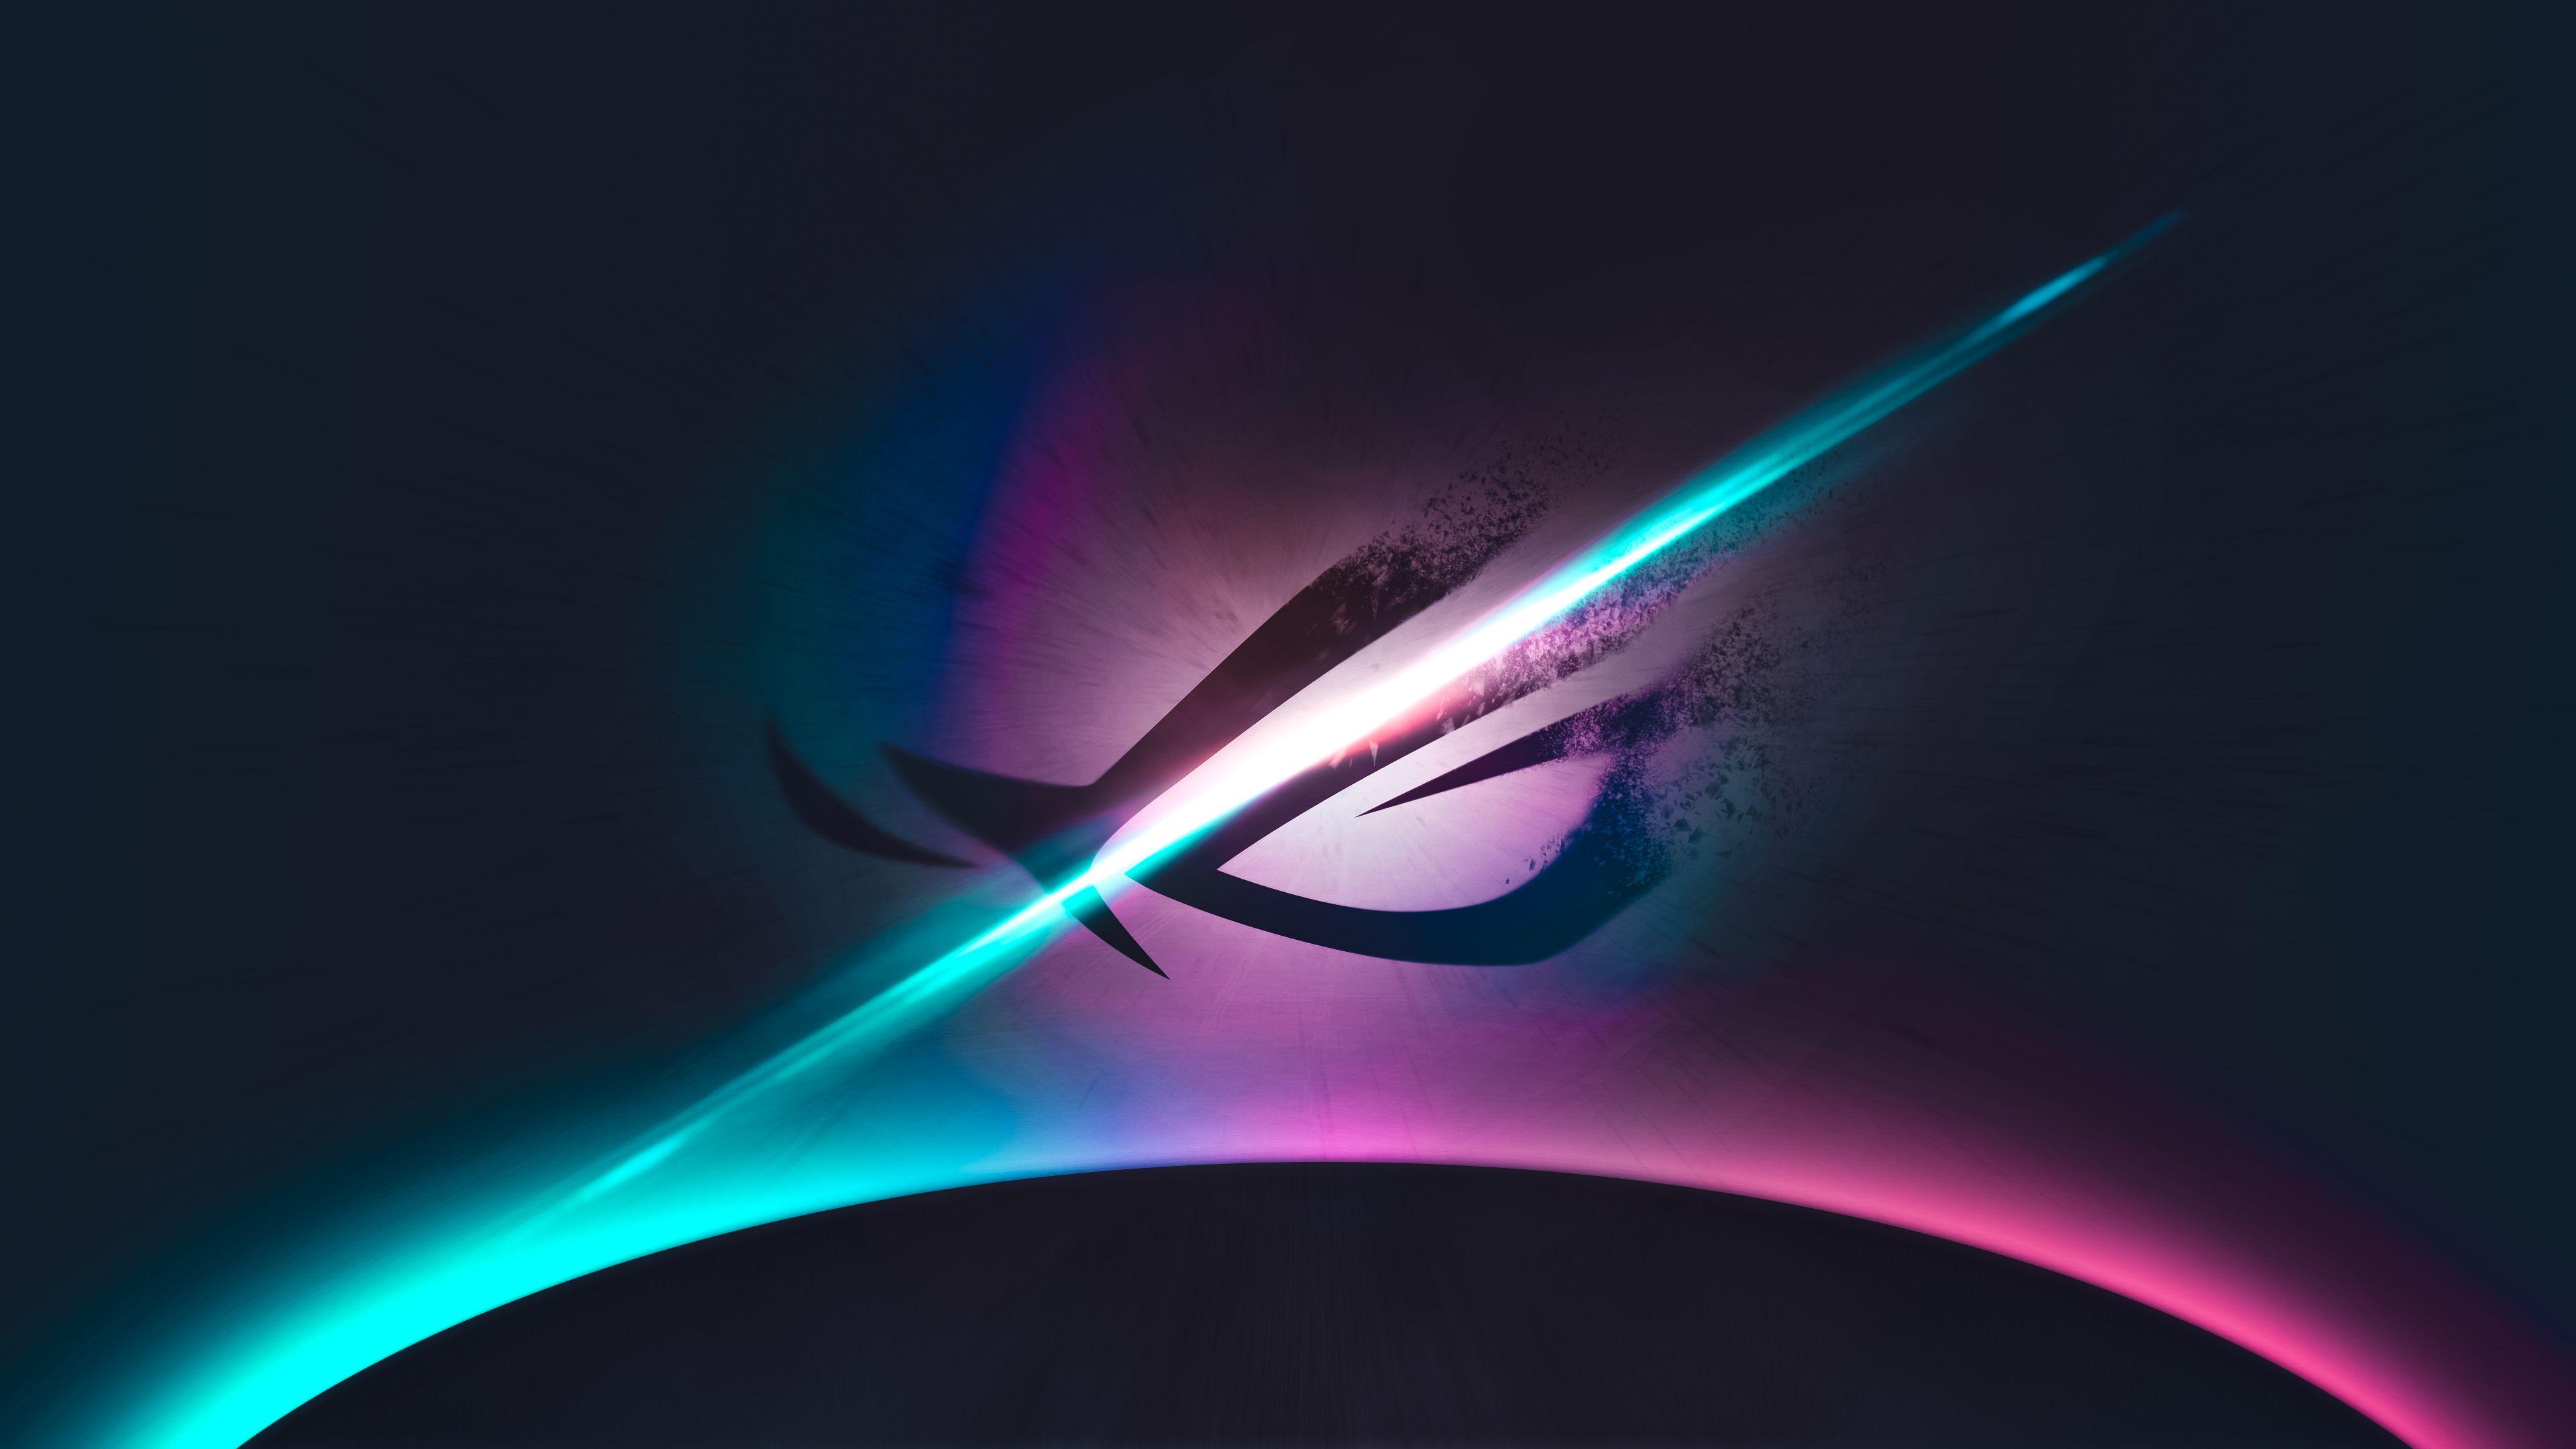 Wallpaper ASUS ROG, 4K, Creative Graphics,. Wallpaper for iPhone, Android, Mobile and Desktop